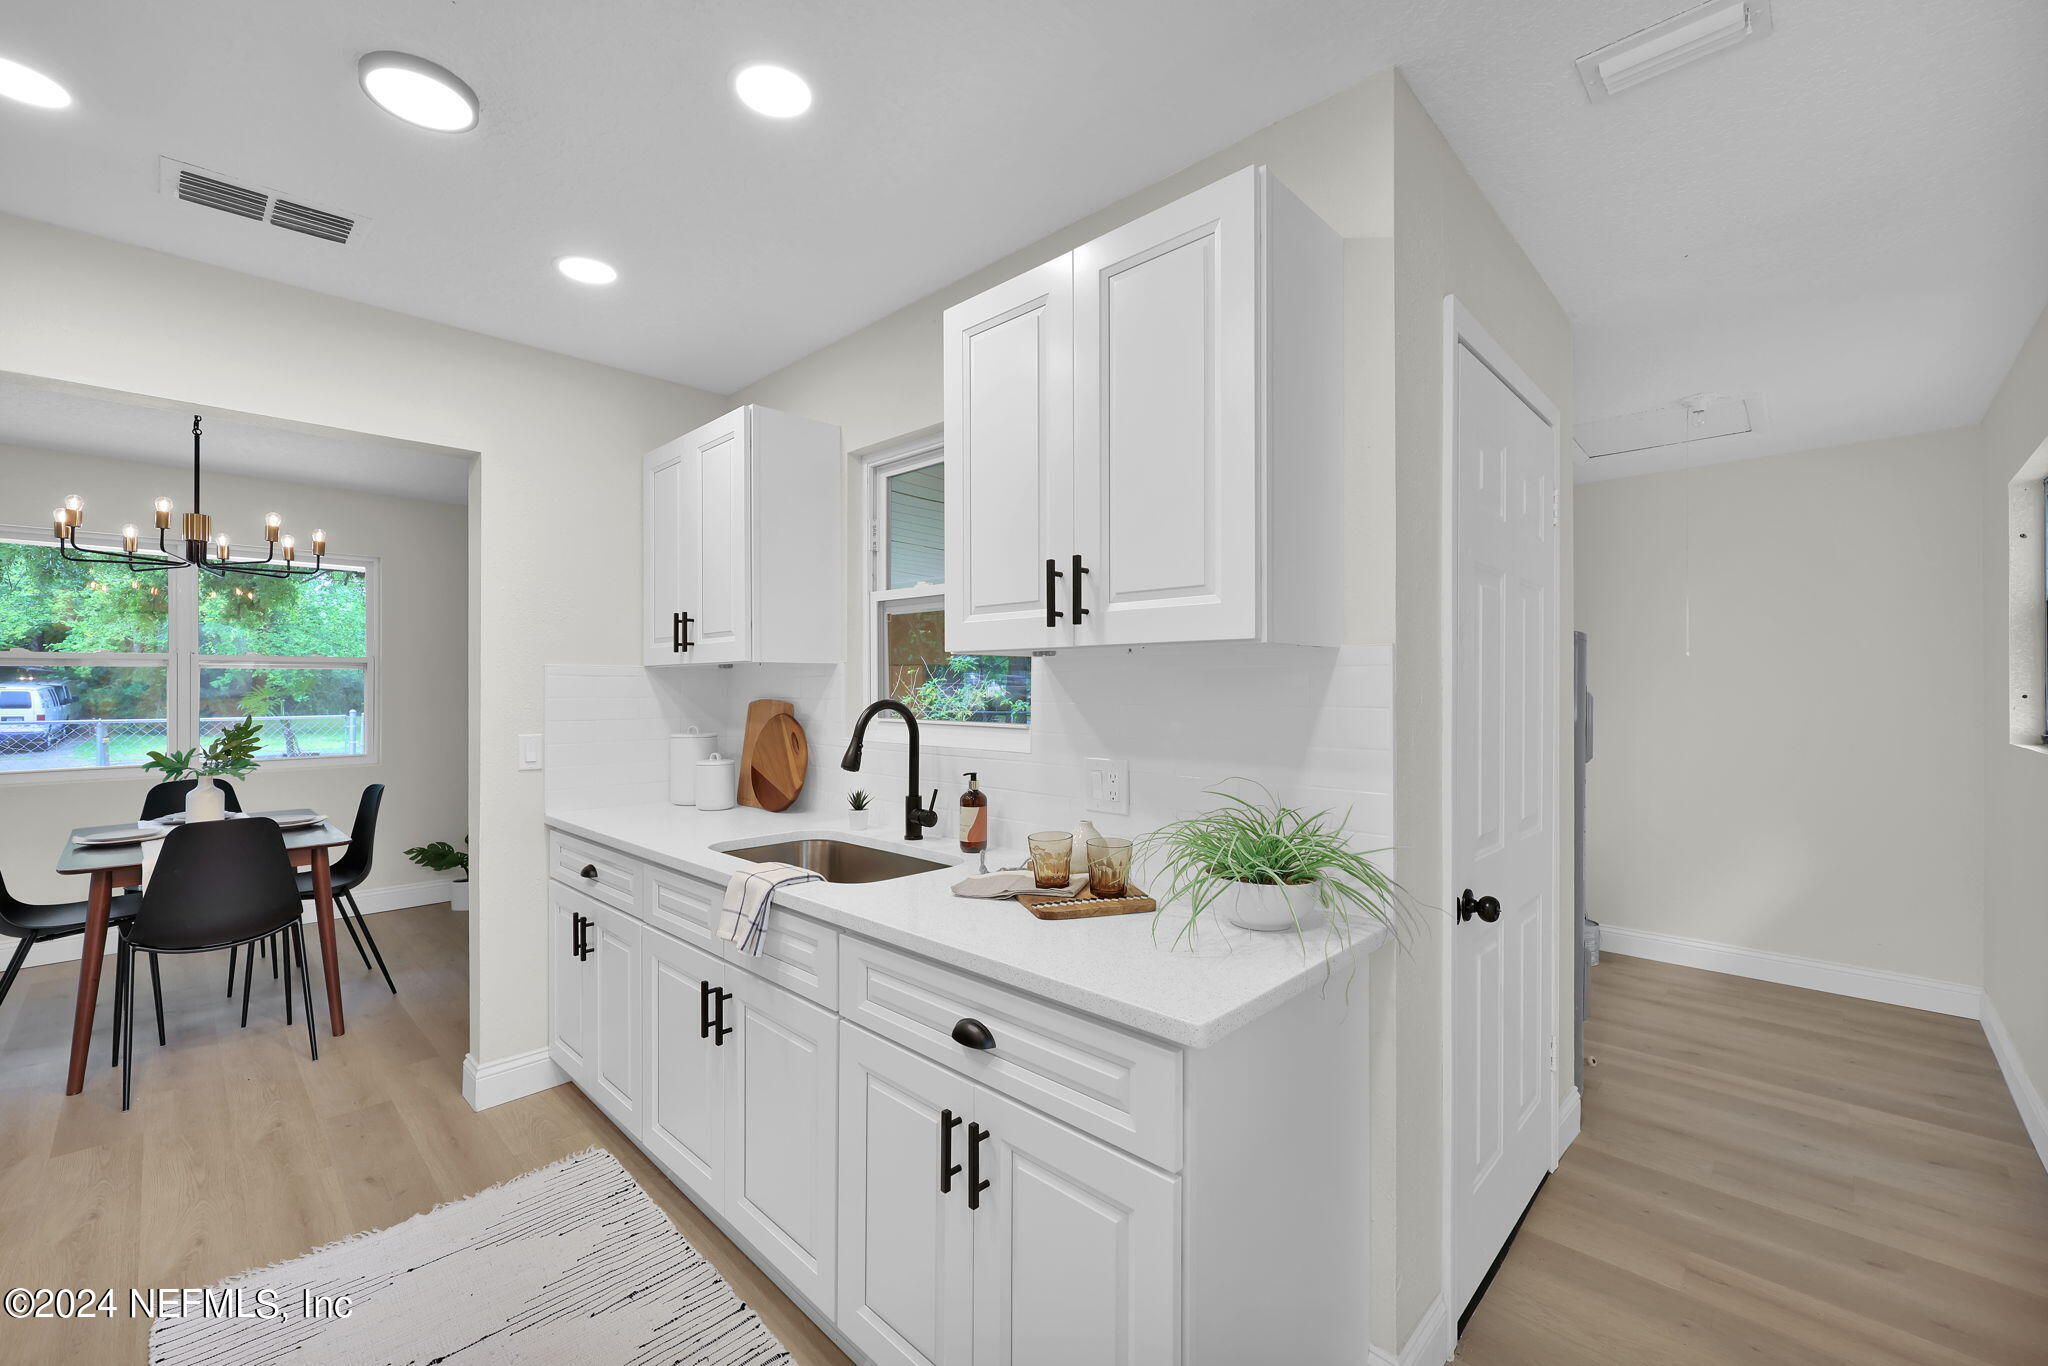 a kitchen with white cabinets and wooden floor